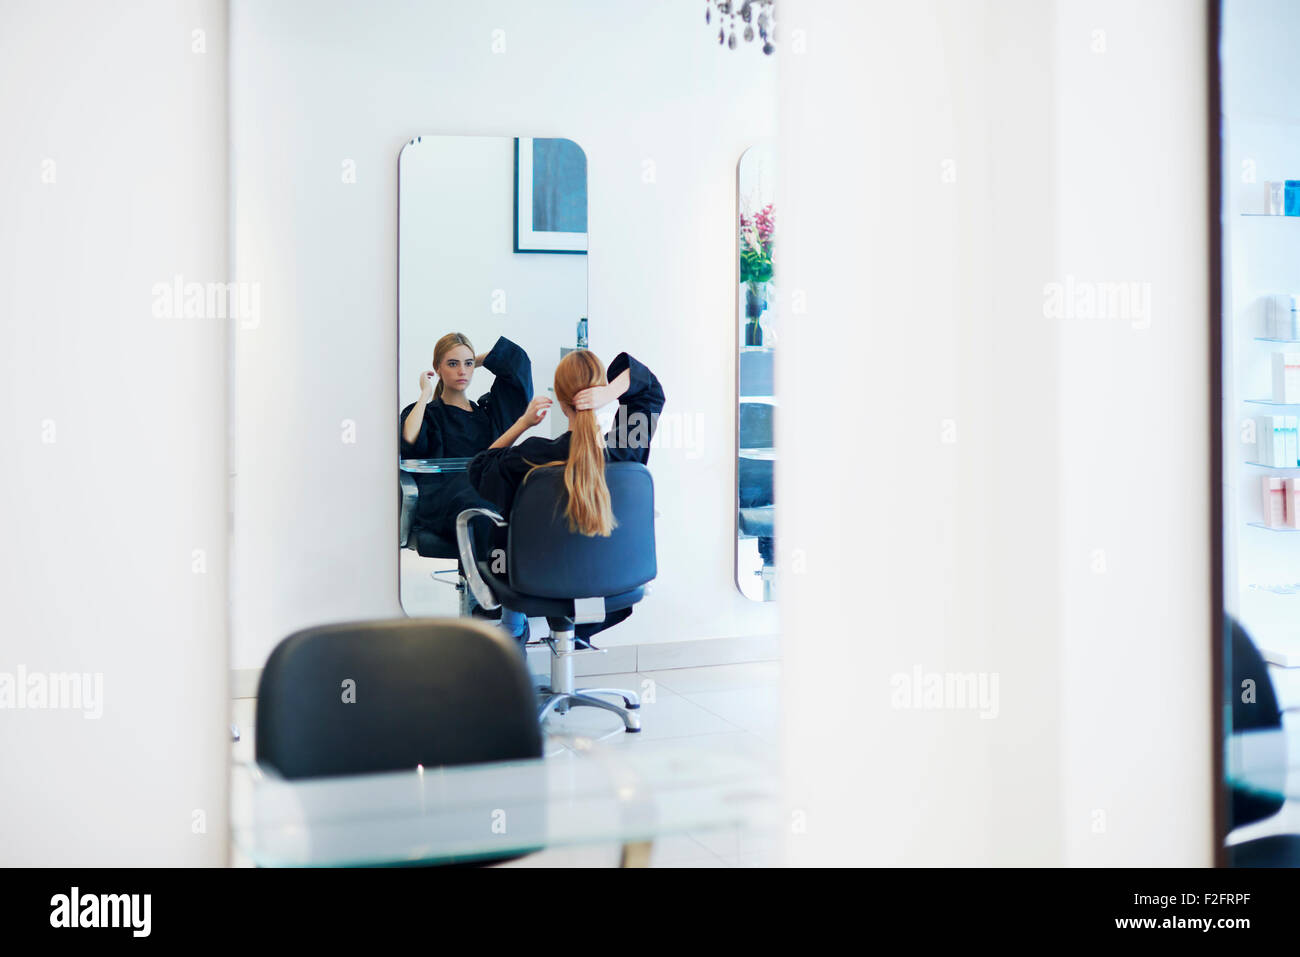 Customer with long hair looking into mirror in hair salon Stock Photo